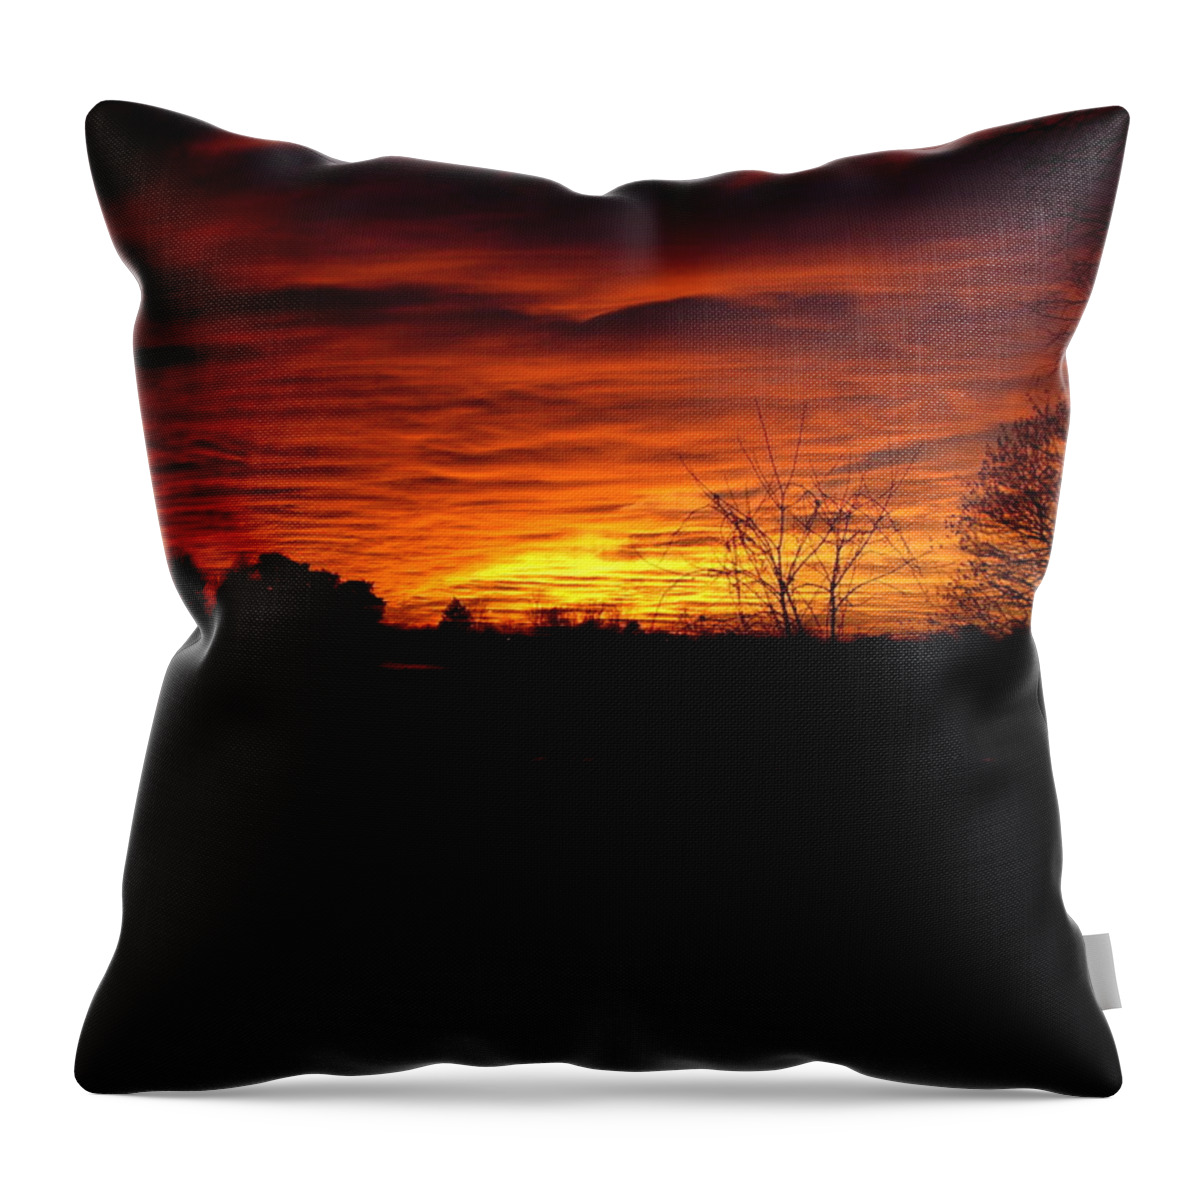 Landscape Throw Pillow featuring the photograph End Of Day by Traci Goebel